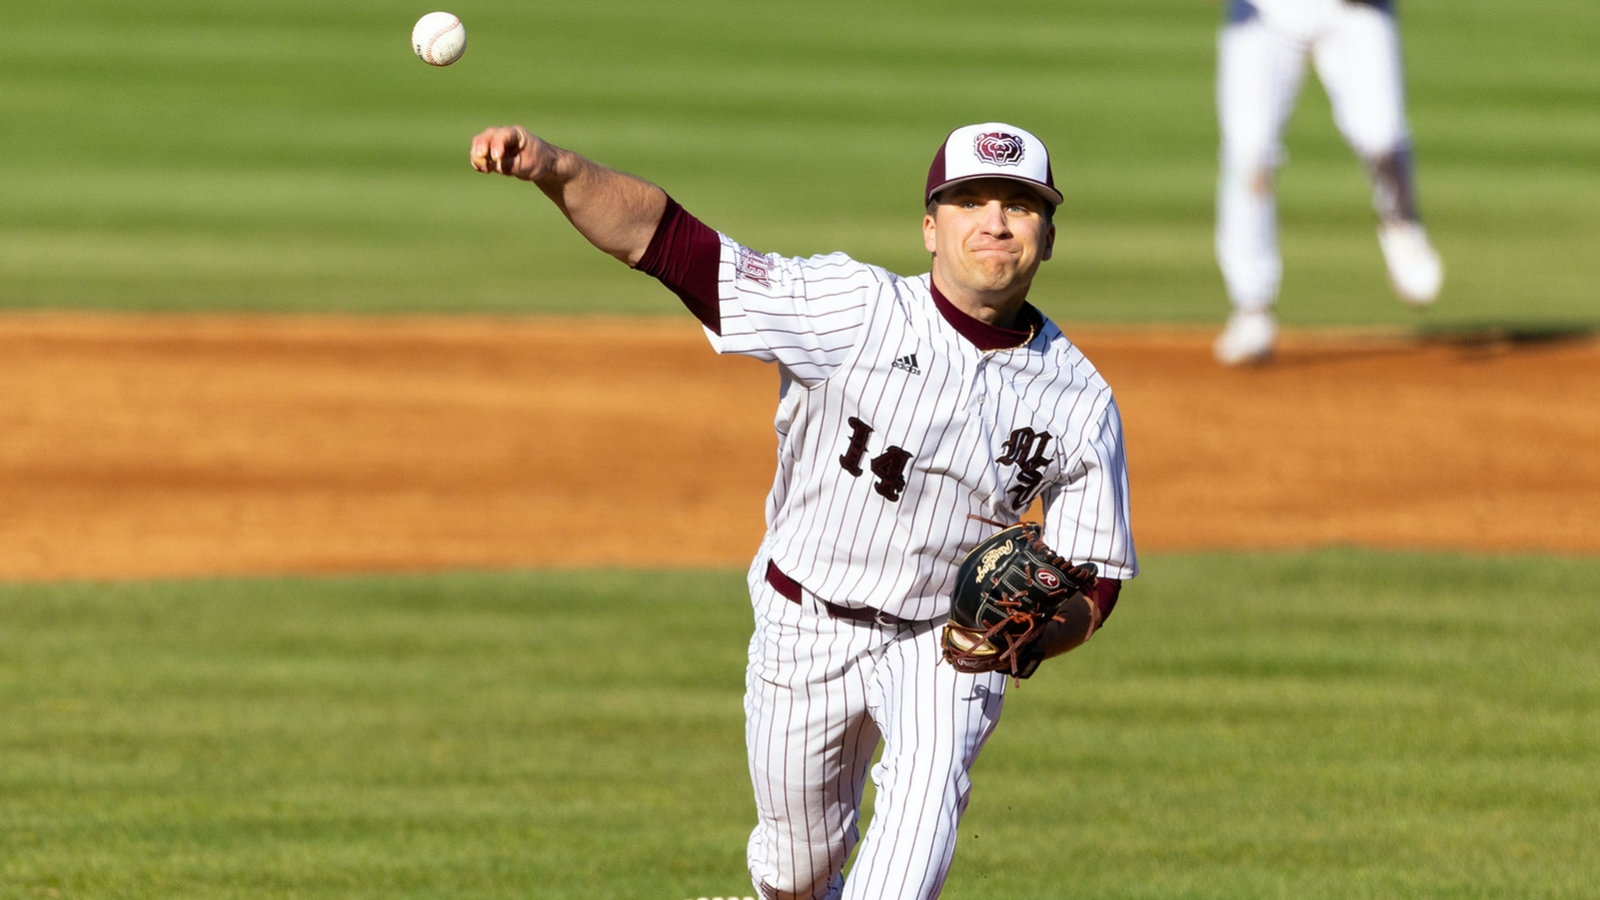 Brandt Thompson, wearing a Missouri State baseball uniform, pitches during a game at Hammons Field.